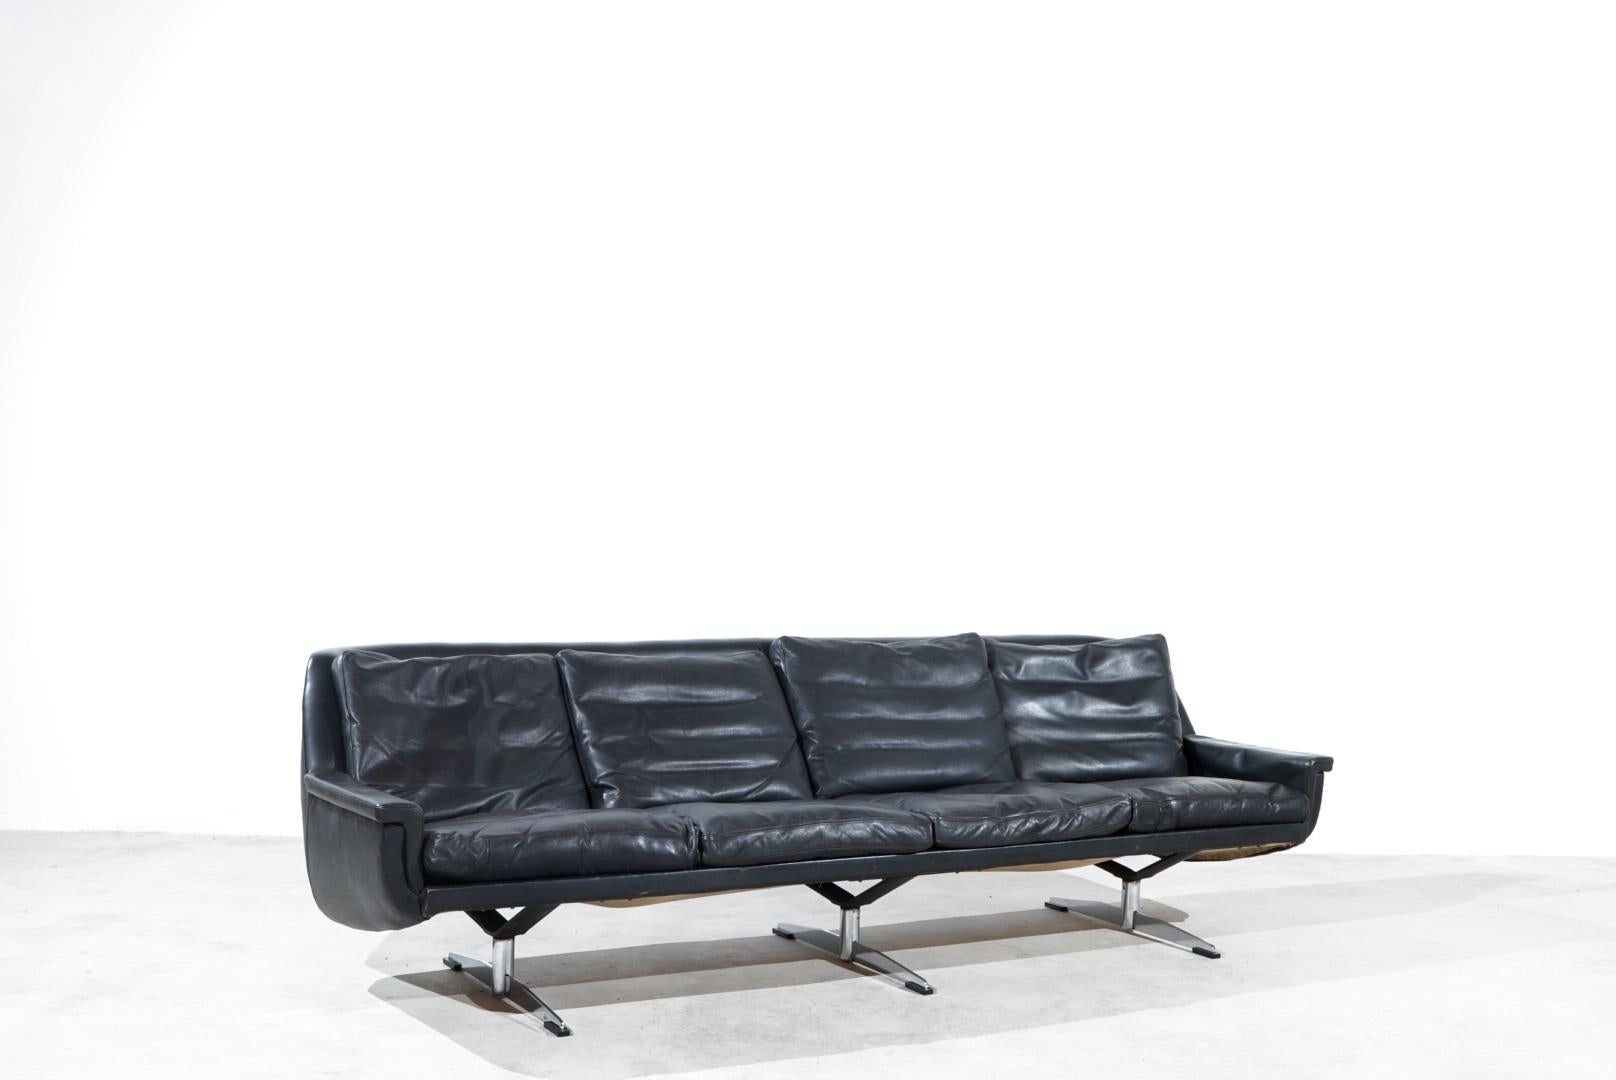 ESA Moebelwerk Denmark Model 802 sofa. 

The design is from Werner Langenfeld during the 1960s.

This sofa was produced in Denmark and is made of smooth black aniline leather.

Rare model with a unique heavy steel swivel base.

Very comfortable and